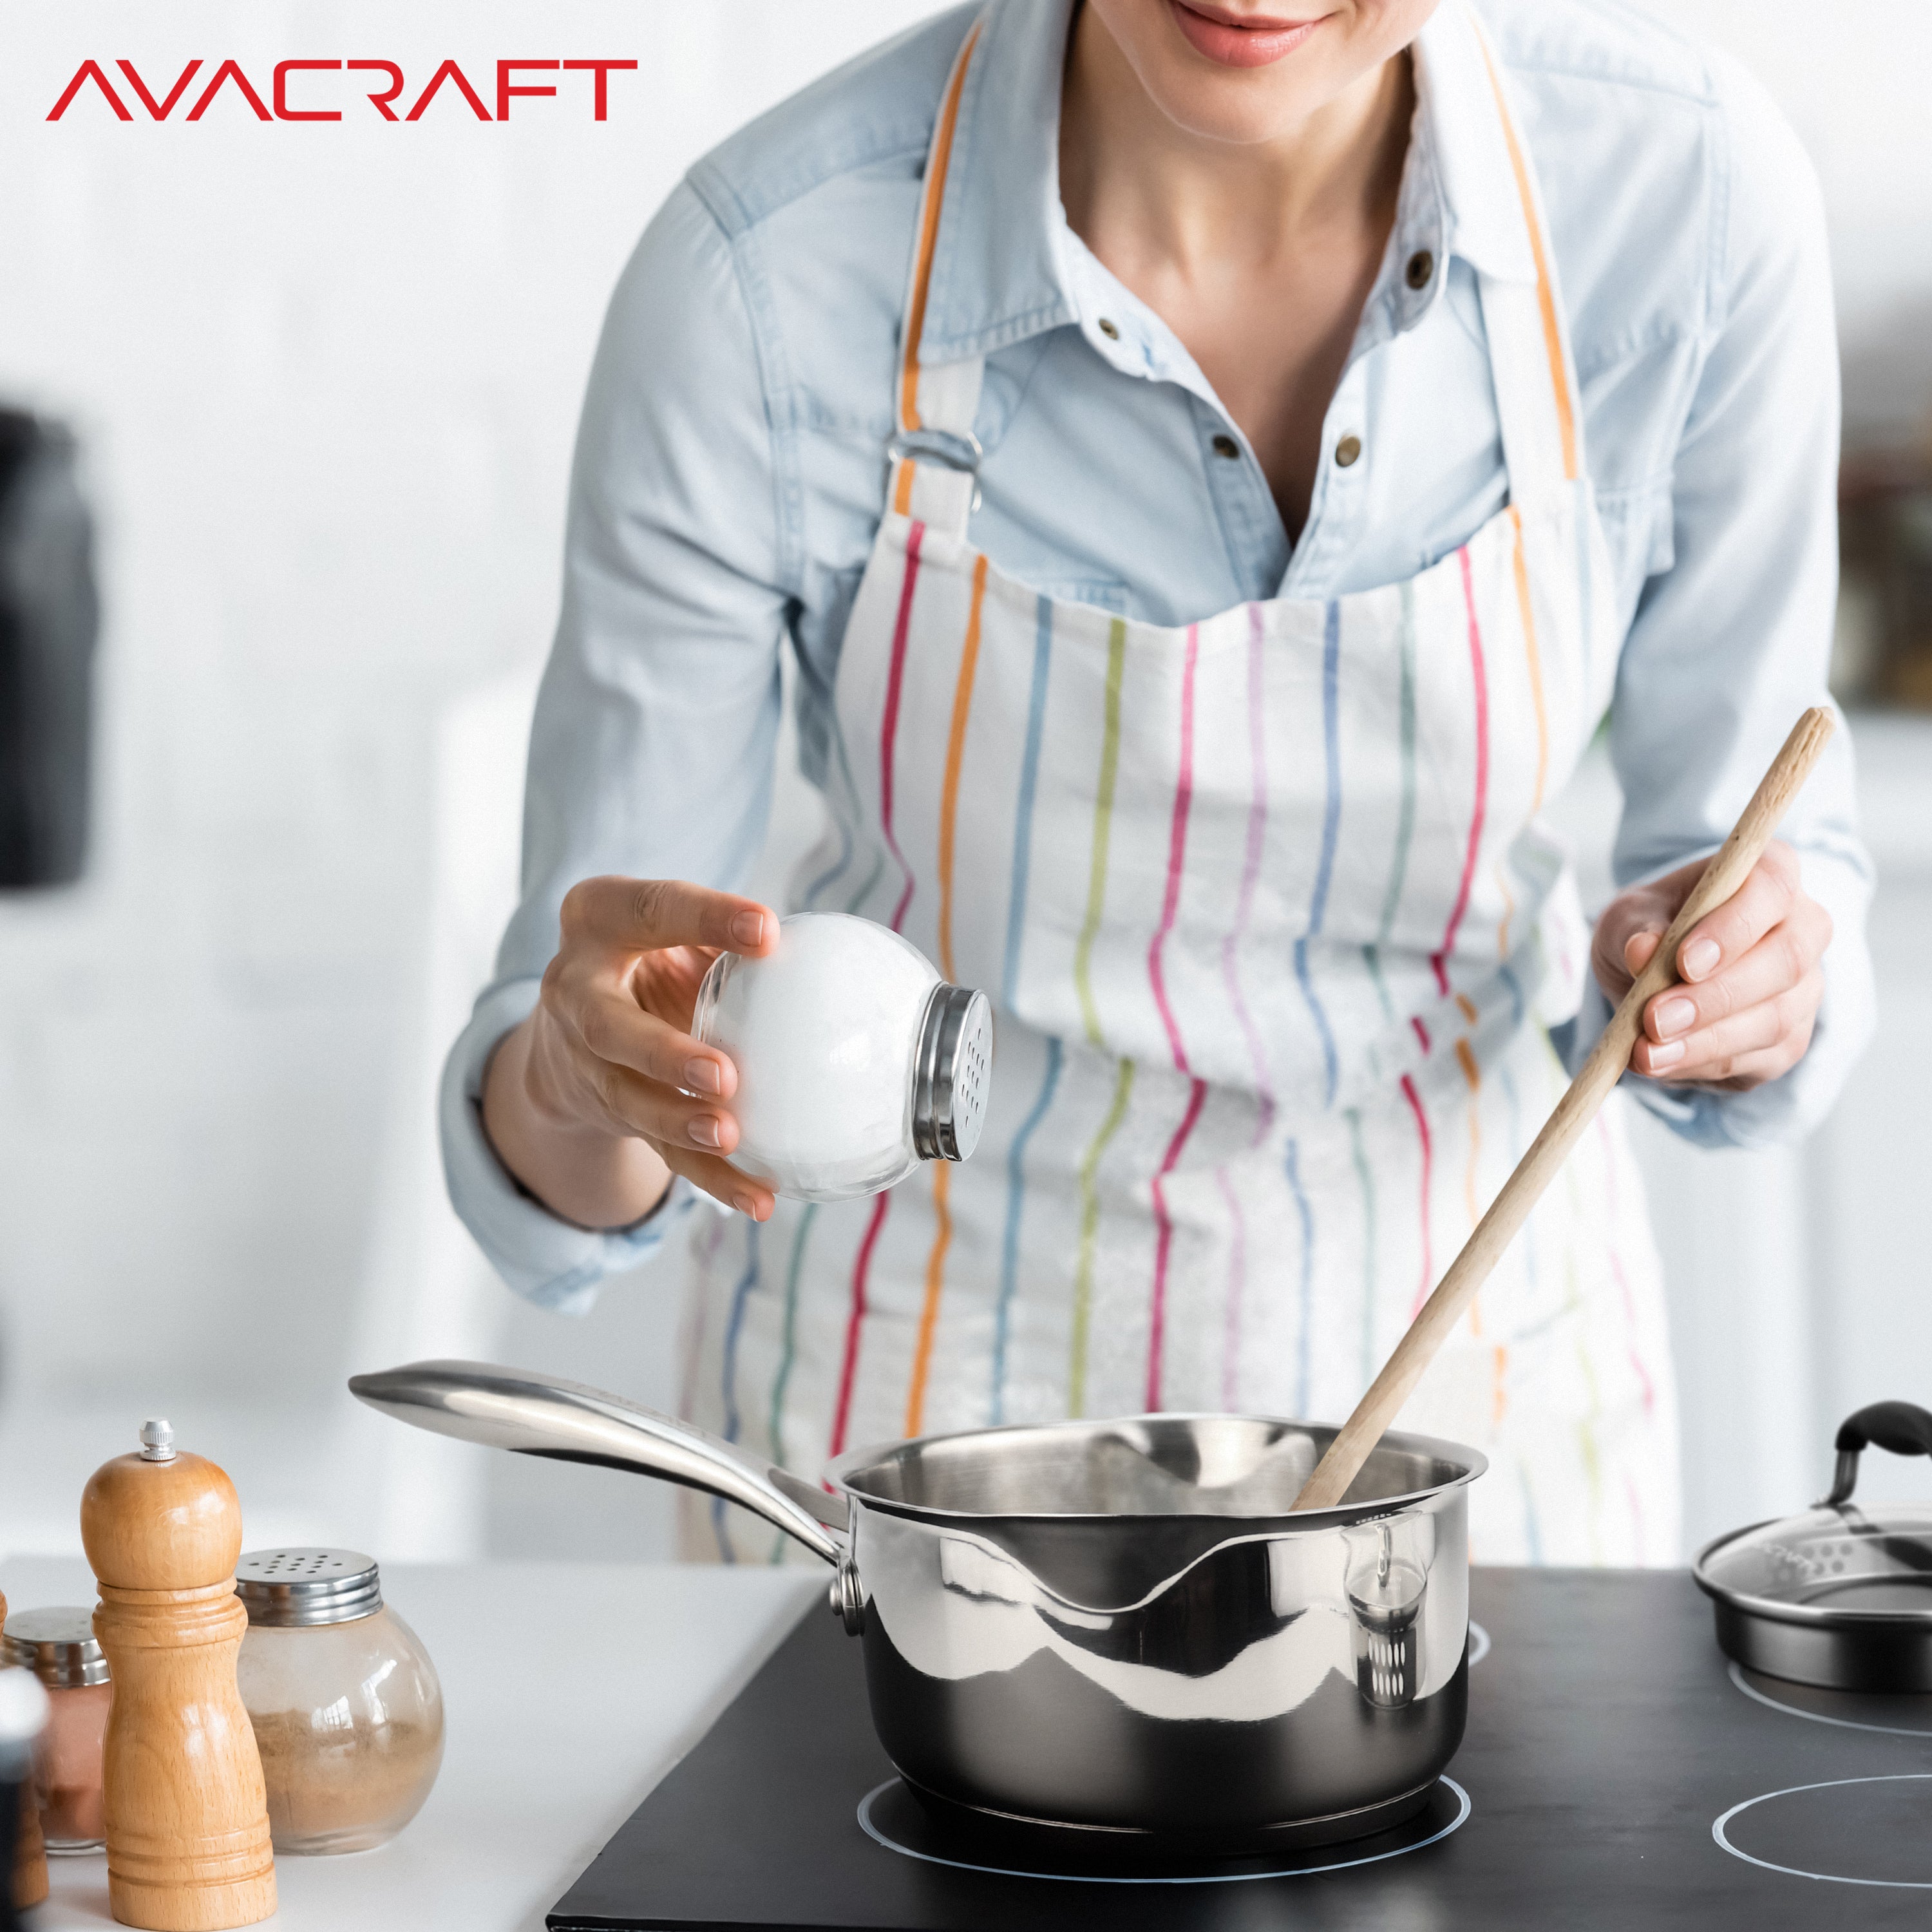 AVACRAFT Tri-Ply Stainless Steel Stockpot with Glass Strainer Lid (Tri-Ply Full Body, 6 qt)